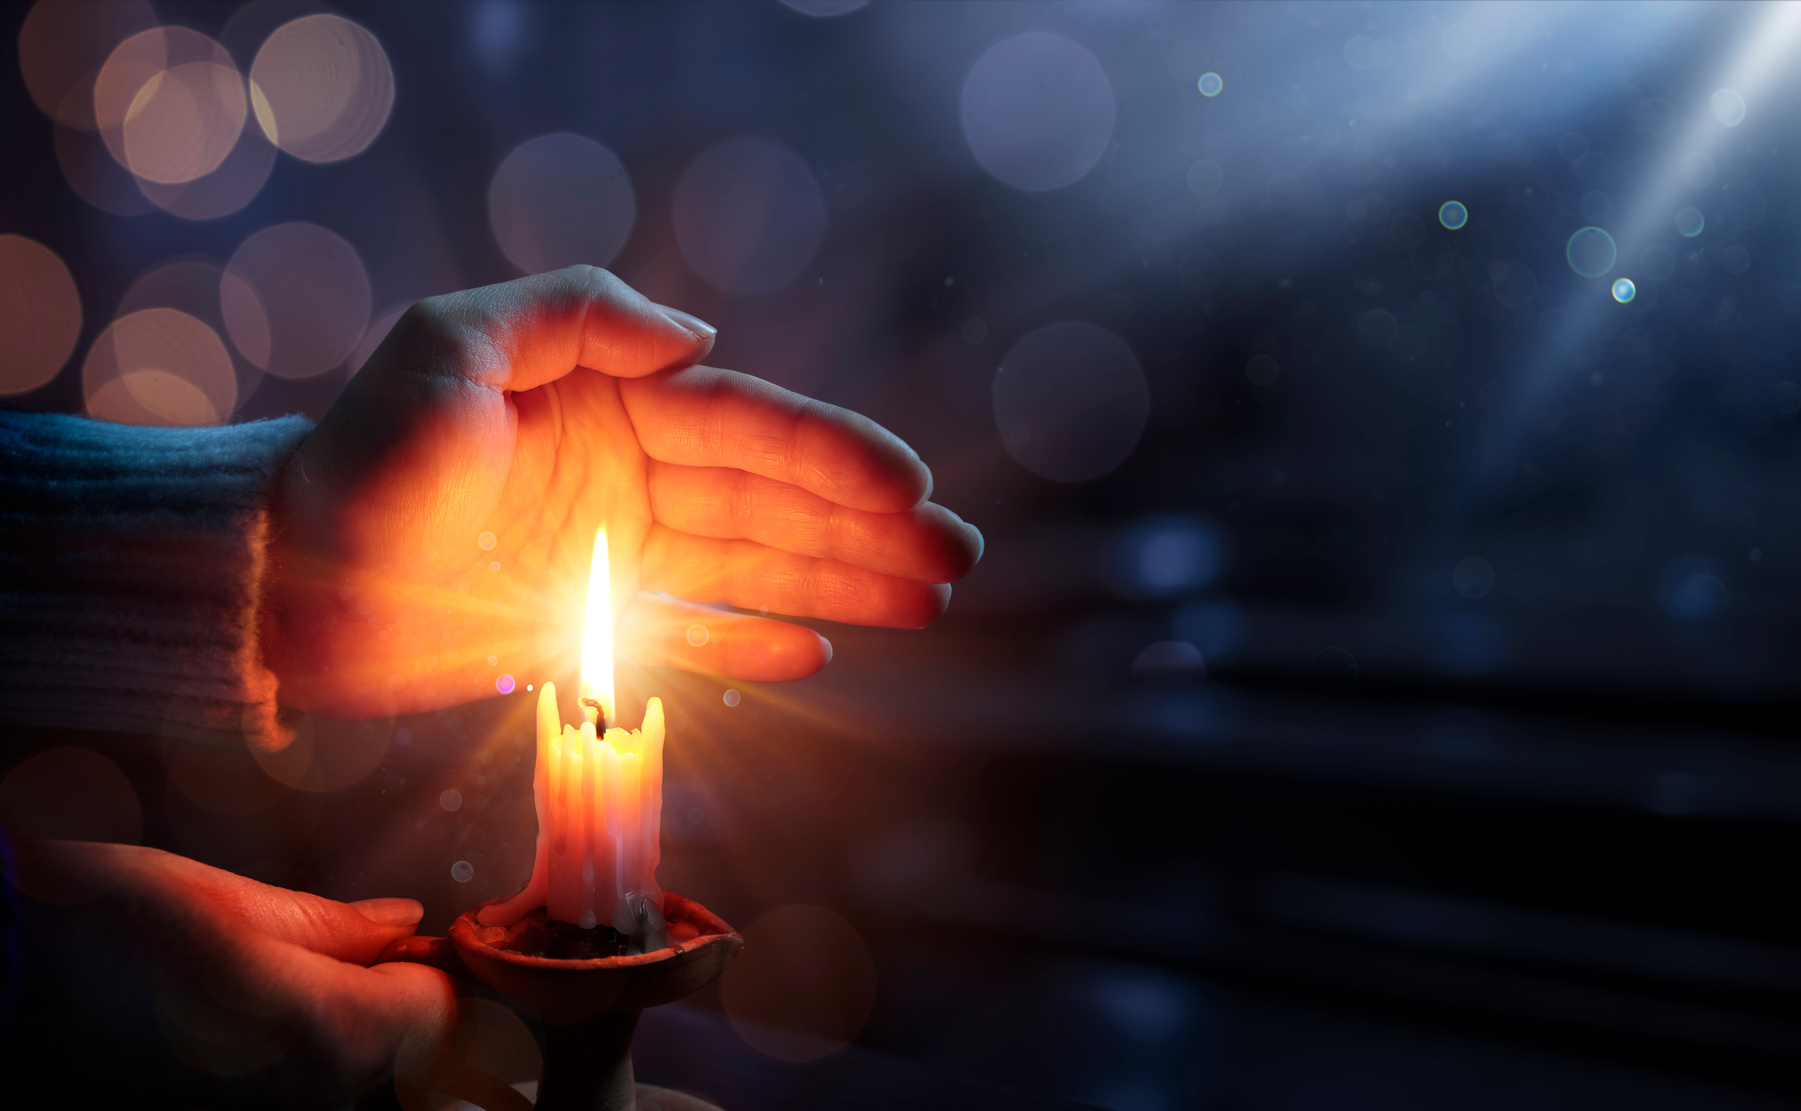 Hope Concept - Hands Holding Candle With Shining Flame And Blurry Lights